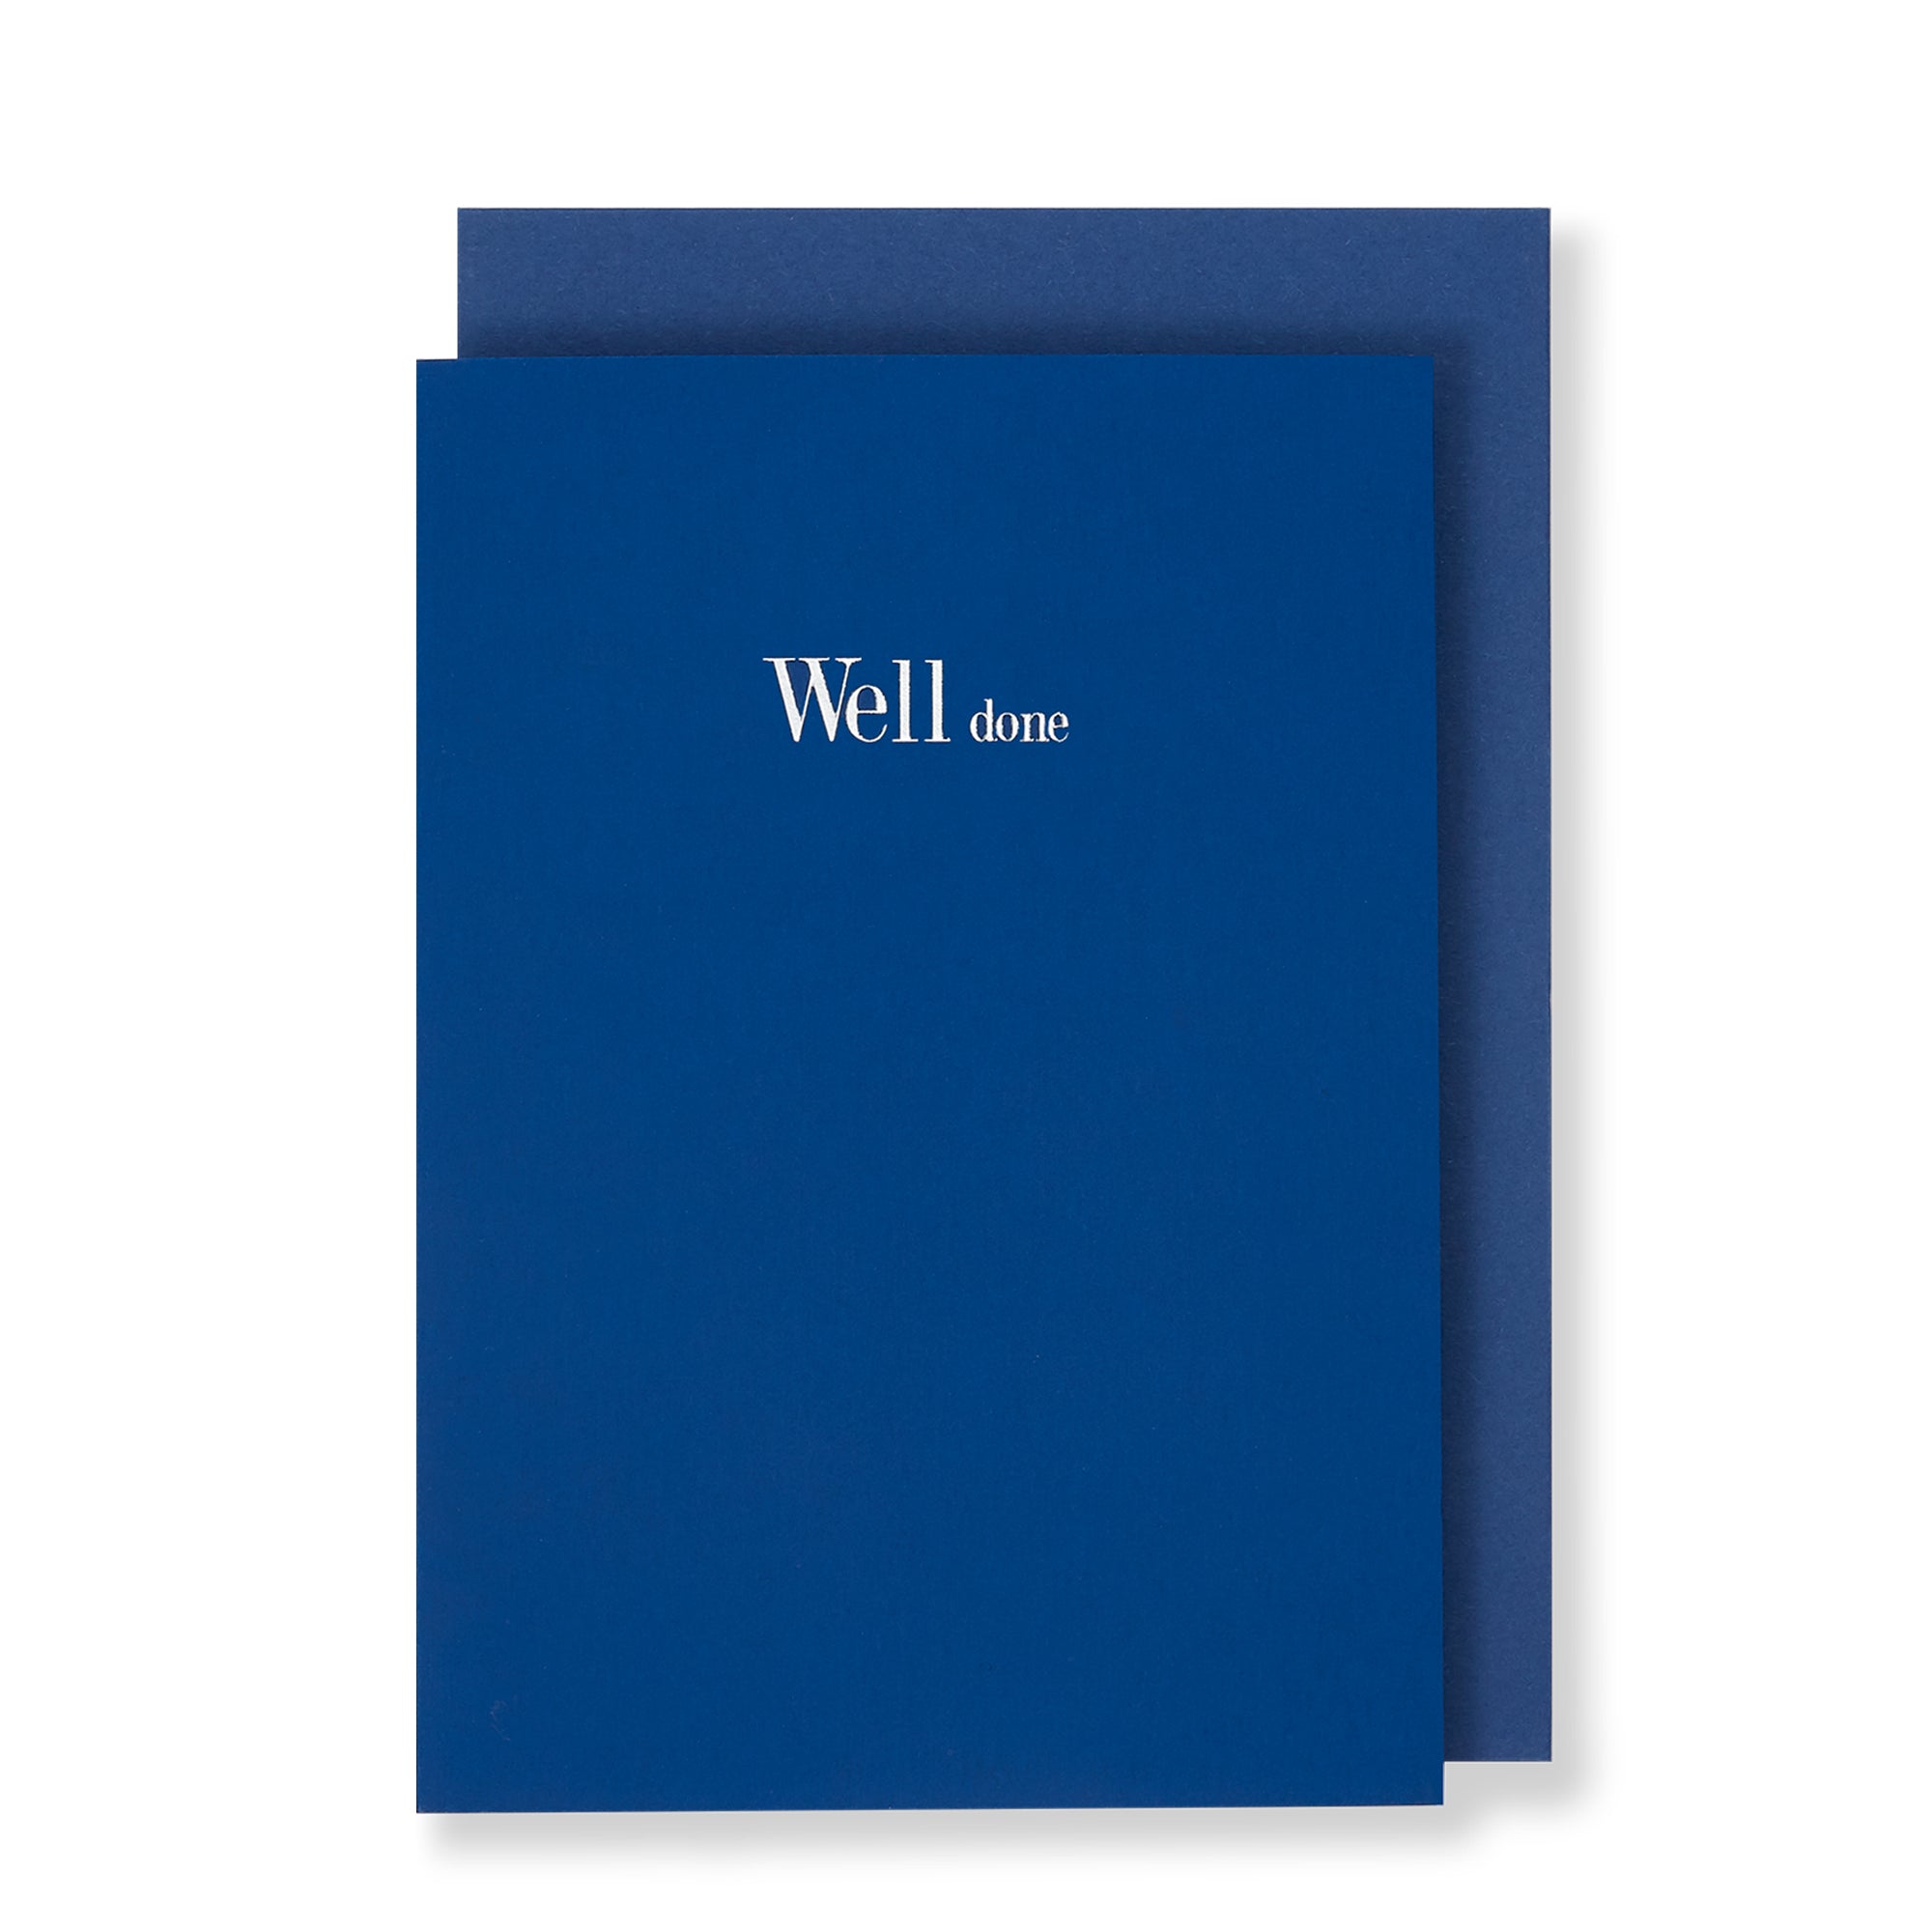 Well Done Greeting Card in Royal Blue, Front